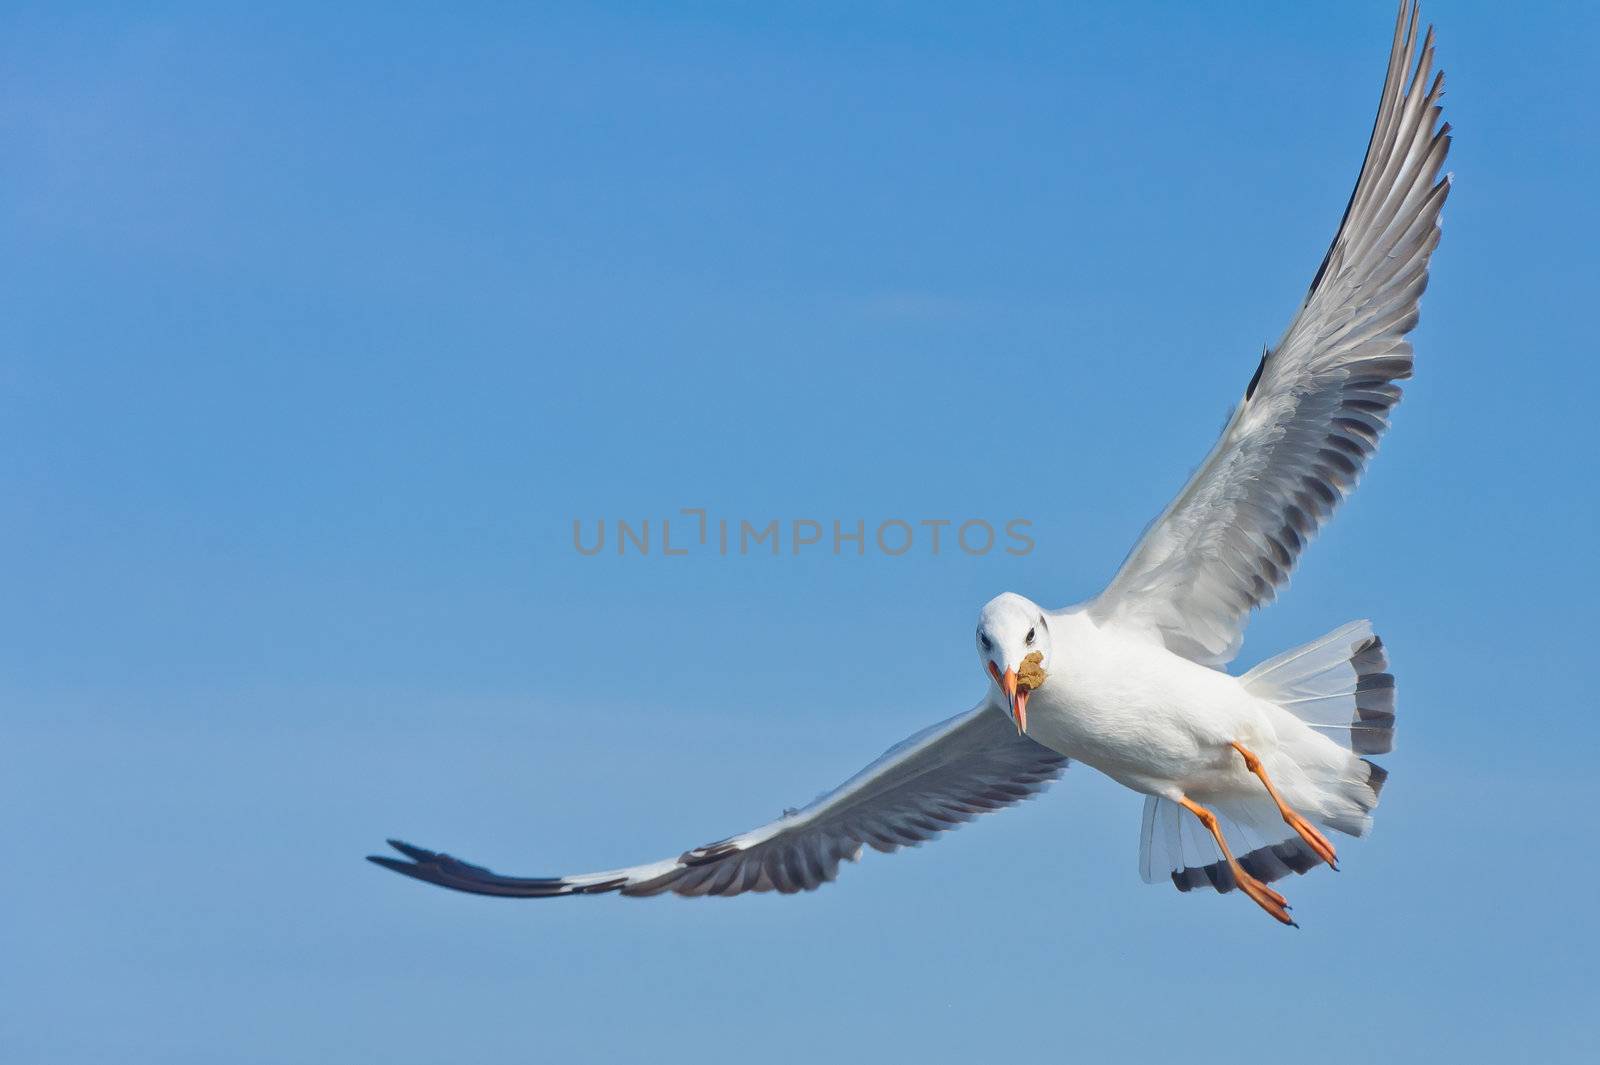 Alone white seagull catch food in mouth flying on the blue sky over the sea at Bang Pu beach, Samutprakan, Thailand